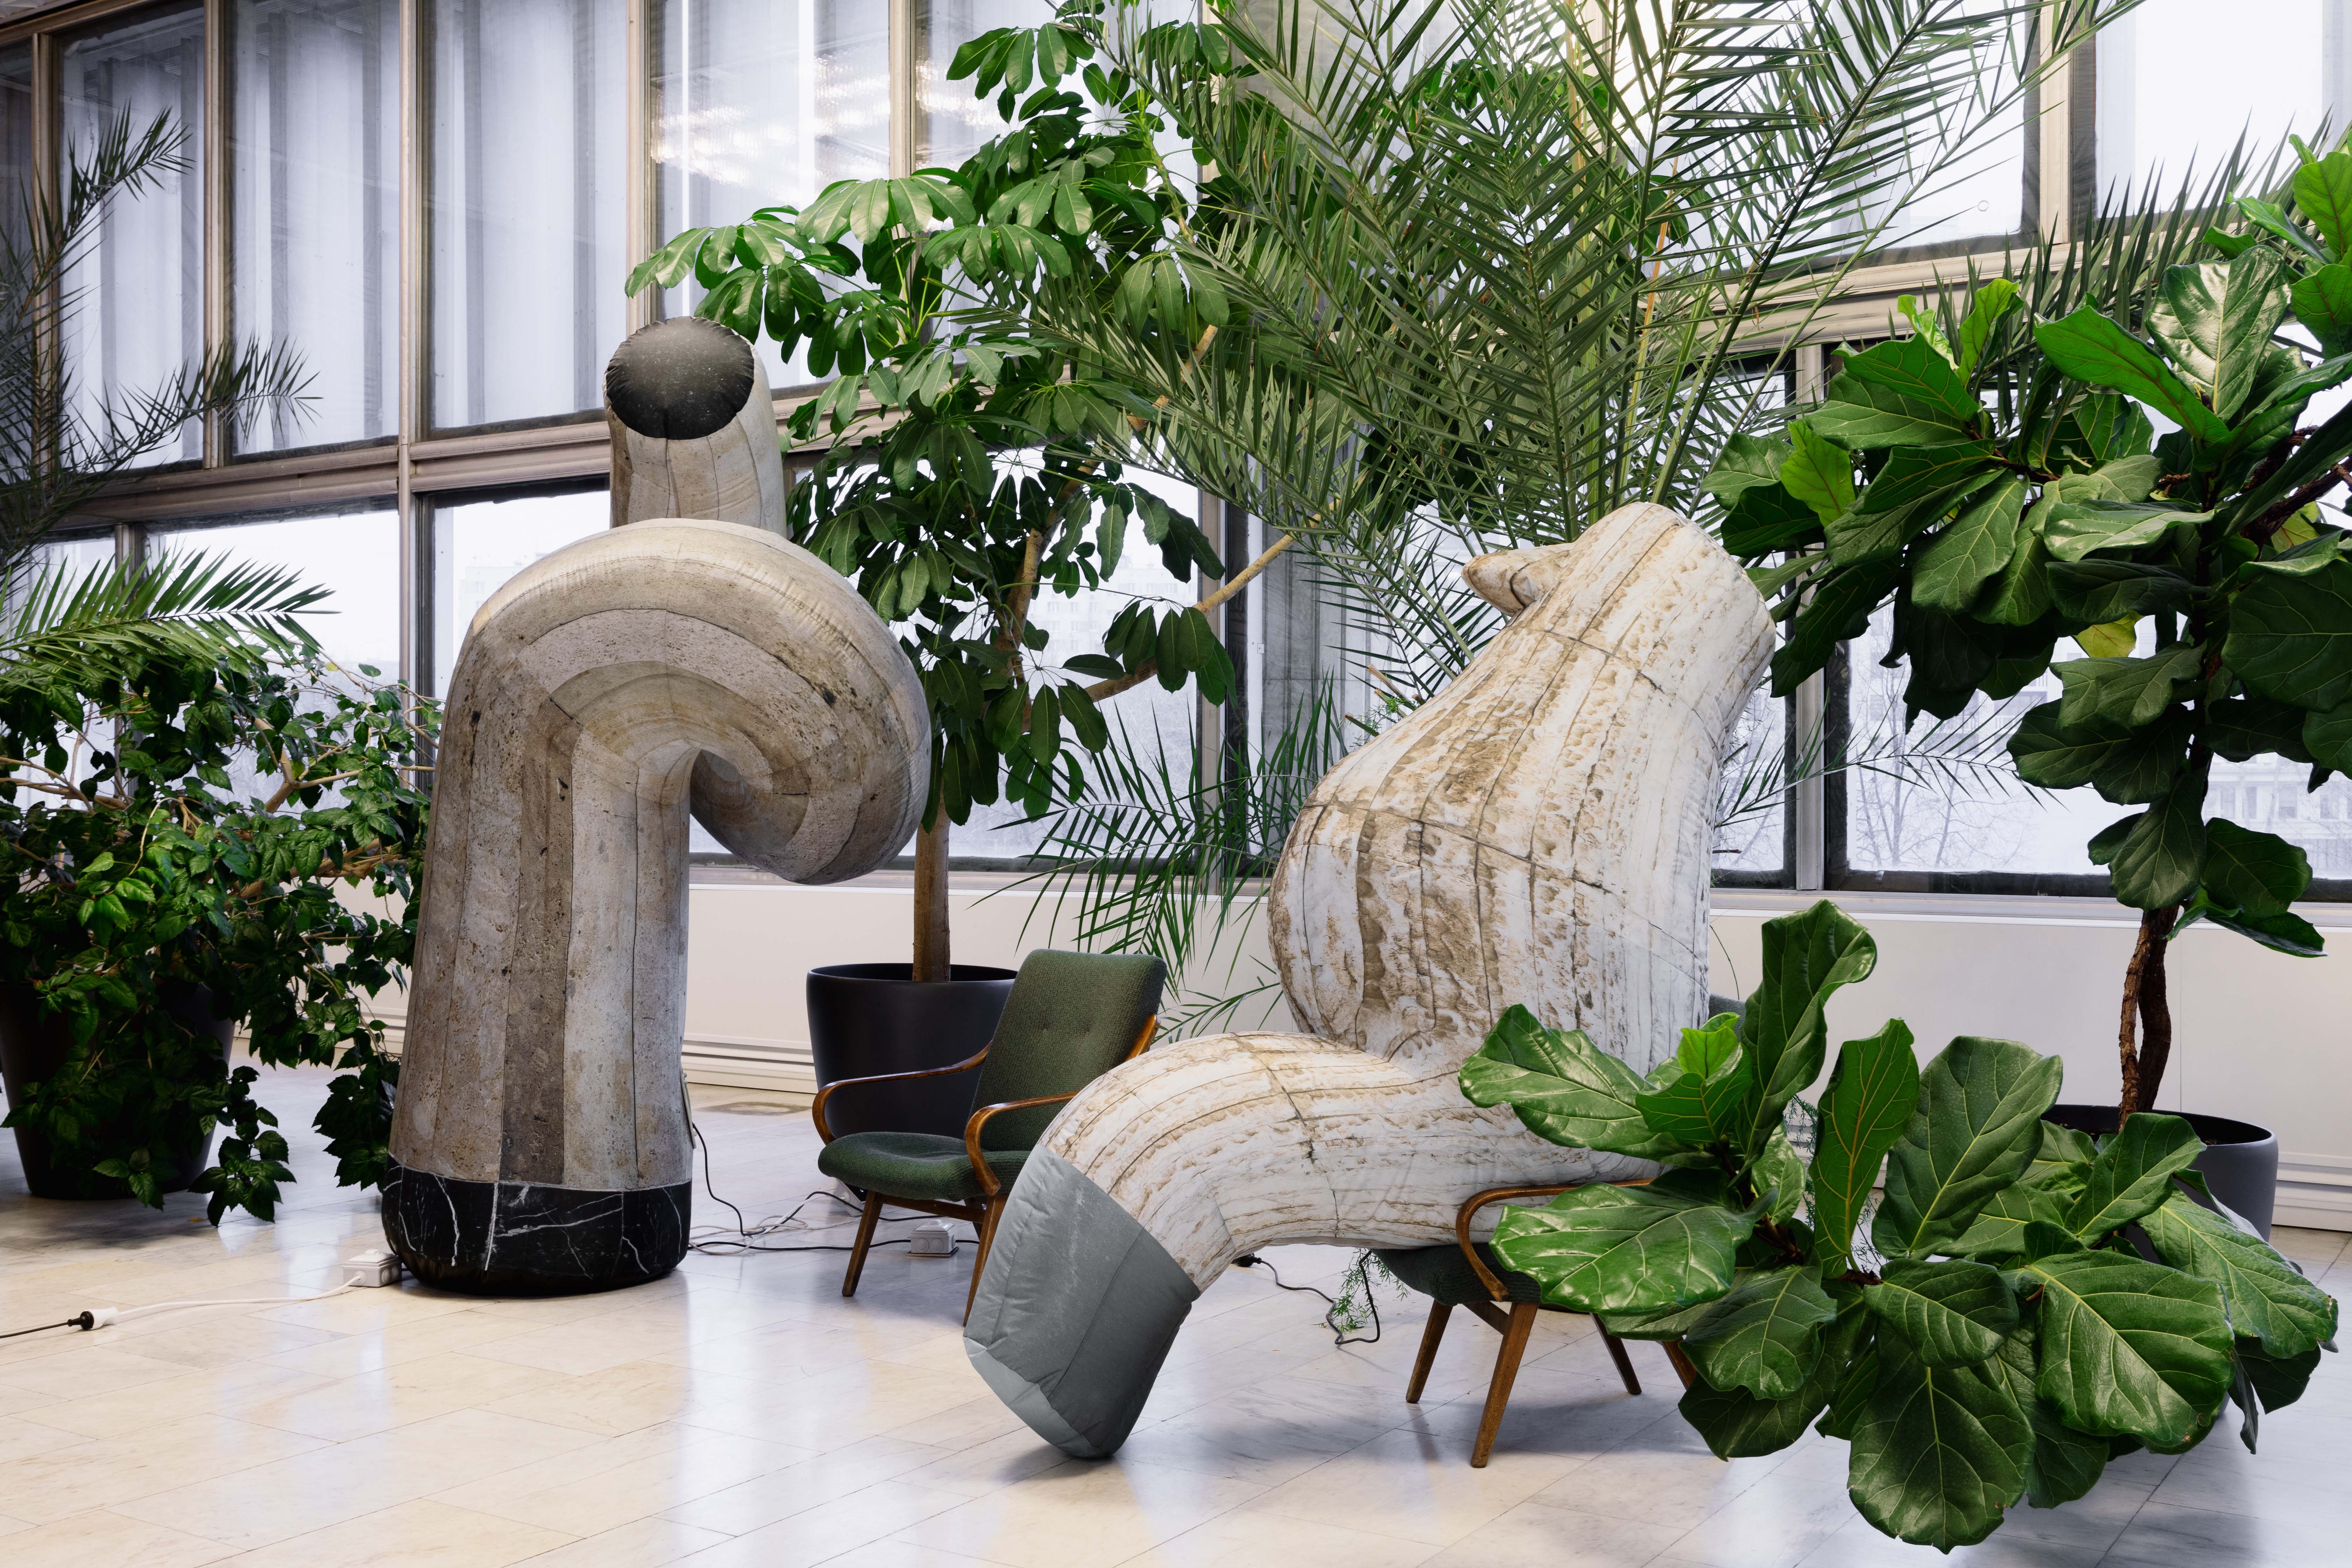 Image of a contemporary art piece surrounded by plants in the Yerevan Botanical Garden building. The art piece consists of two blown-up shapes with a light-colored, striped pattern; the one on the left is standing with a curved in its structure, the one o